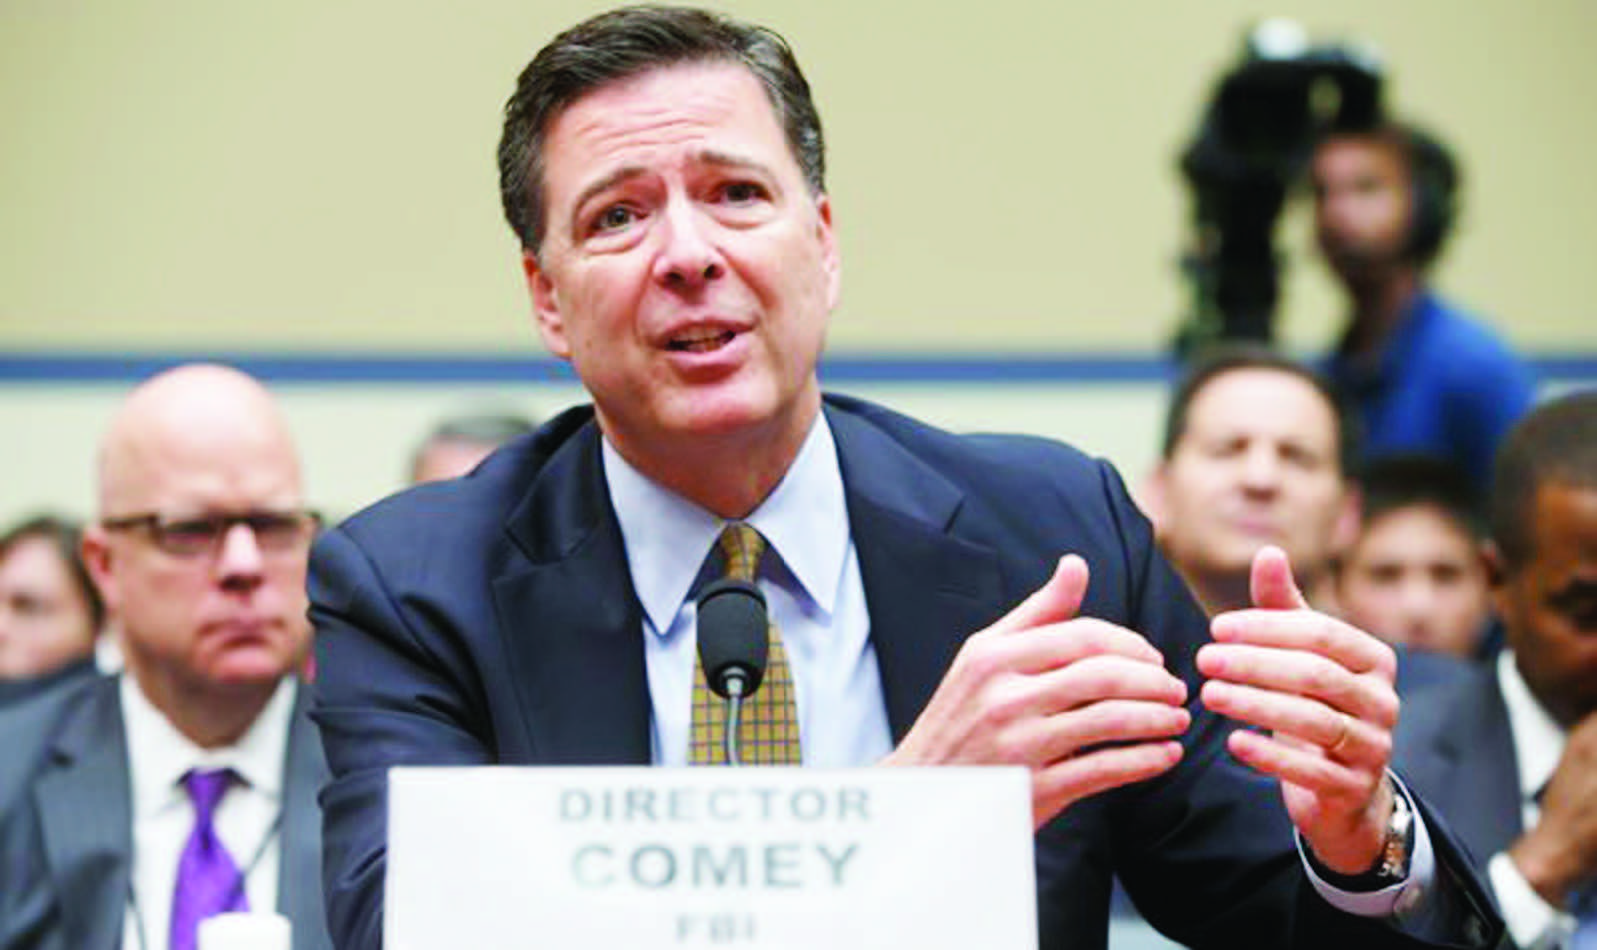 FBI Director Comey gave details, March 20, on the extent of Russian influence in the 2016 U.S. election, confirming an open FBI investigation into Moscow's alleged interference and refuting President Donald Trump's explosive claim that Trump Tower was wiretapped.